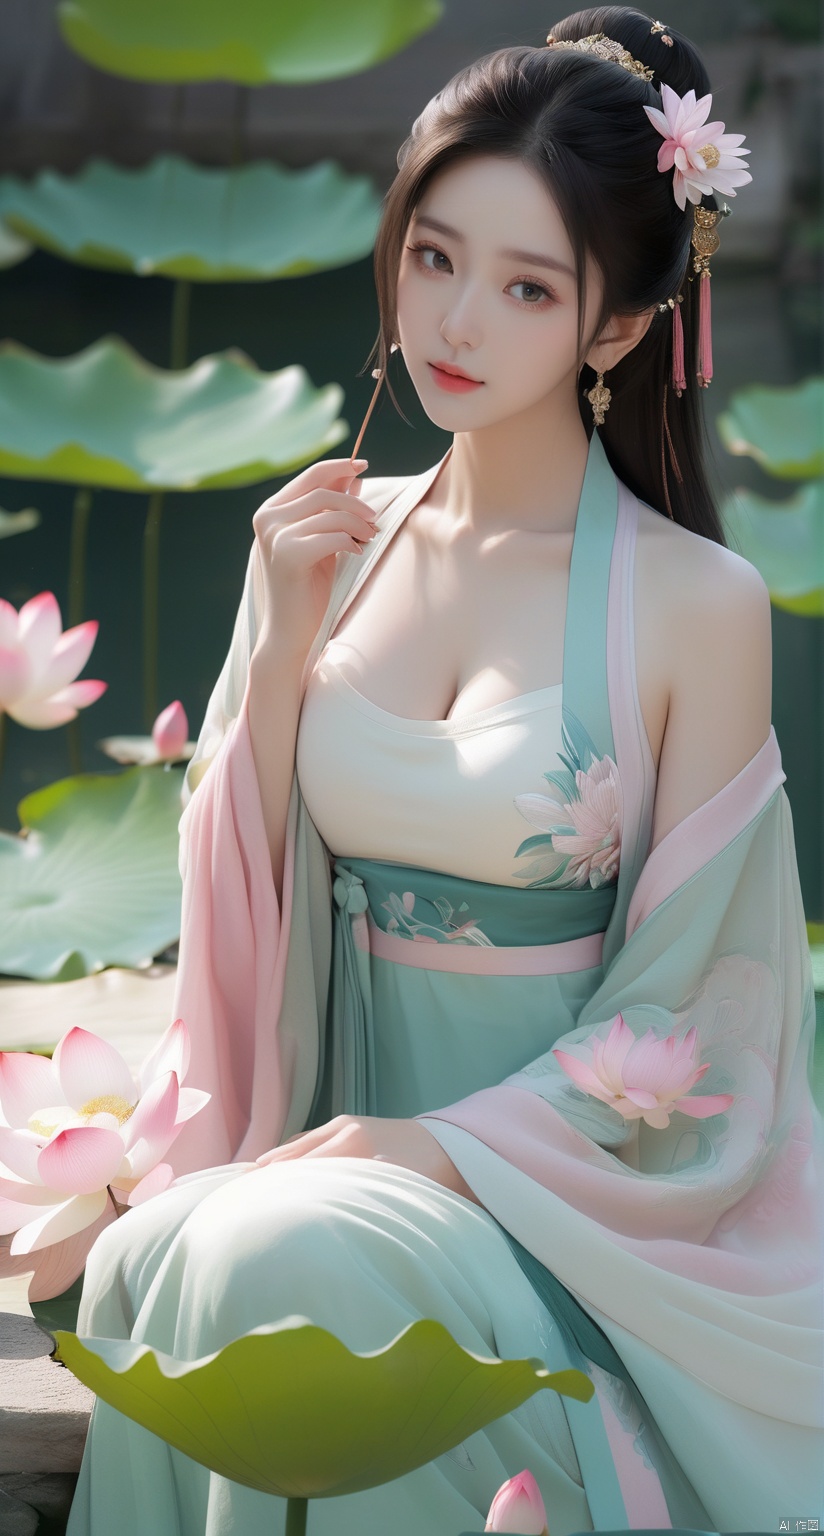  Best quality, Realistic, photorealistic, masterpiece, extremely detailed CG unity 8k wallpaper, best illumination, best shadow, huge filesize ,(huge breasts:2) incredibly absurdres, absurdres, looking at viewer, transparent, smog, gauze, vase, petals, room, ancient Chinese style, detailed background, wide shot background,
(((1gilr,black hair))),(Sitting on the lotus pond porch:1.39) ,(huge breasts:2.4),(A pond full of pink lotus flowers:1.3),close up of 1girl,Hairpins,hair ornament,hair wings,slim,narrow waist,(huge breasts:2.3),perfect eyes,beautiful perfect face,pleasant smile,perfect female figure,detailed skin,charming,alluring,seductive,erotic,enchanting,delicate pattern,detailed complex and rich exquisite clothing detail,delicate intricate fabrics,
Morning Serenade In the gentle morning glow, (a woman in a pink lotus-patterned Hanfu stands in an indoor courtyard:1.26),(Chinese traditional dragon and phoenix embroidered Hanfu:1.3), admiring the tranquil garden scenery. The lotus-patterned Hanfu, embellished with silver-thread embroidery, is softly illuminated by the morning light. The light mint green Hanfu imparts a sense of calm and freshness, adorned with delicate lotus patterns, with a blurred background to enhance the peaceful atmosphere,(huge breasts:2.5), puregirl, g009